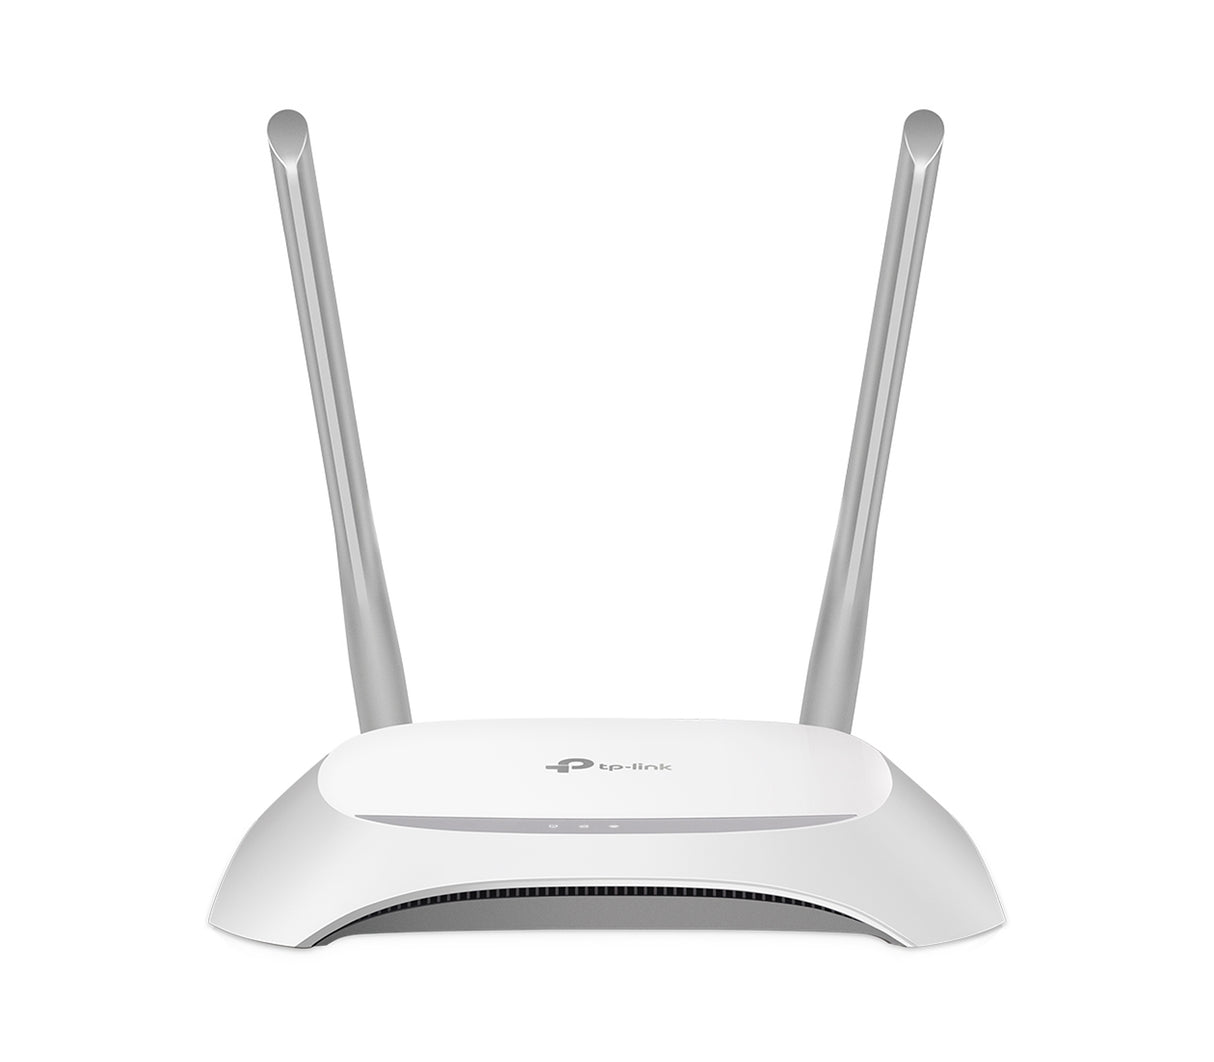 Router Inalámbrico TL-WR840N 300 MP TP-LINK